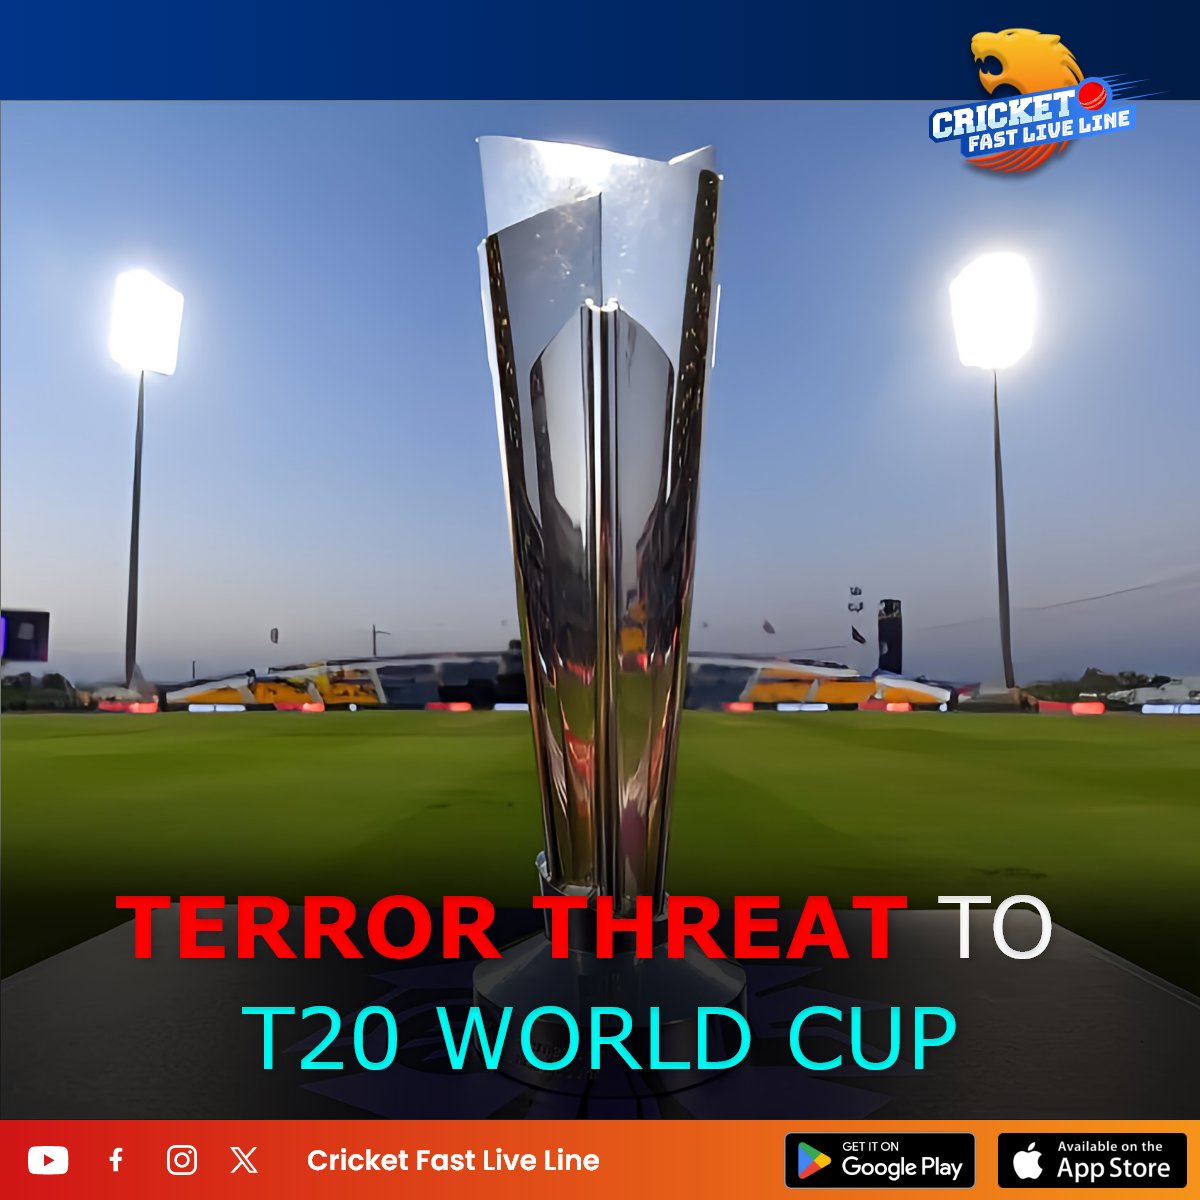 West Indies have received a terror threat to the 2024 T20 World Cup from North Pakistan.🚨 And also The ICC and the CWI have assured safety.

#T20WorldCup2024 #T20WorldCup #T20WC2024  #ICCT20WorldCup  #icccricketworldcup #icc #cwi #westindies #WorldCup  #cricketnews  #Cricket